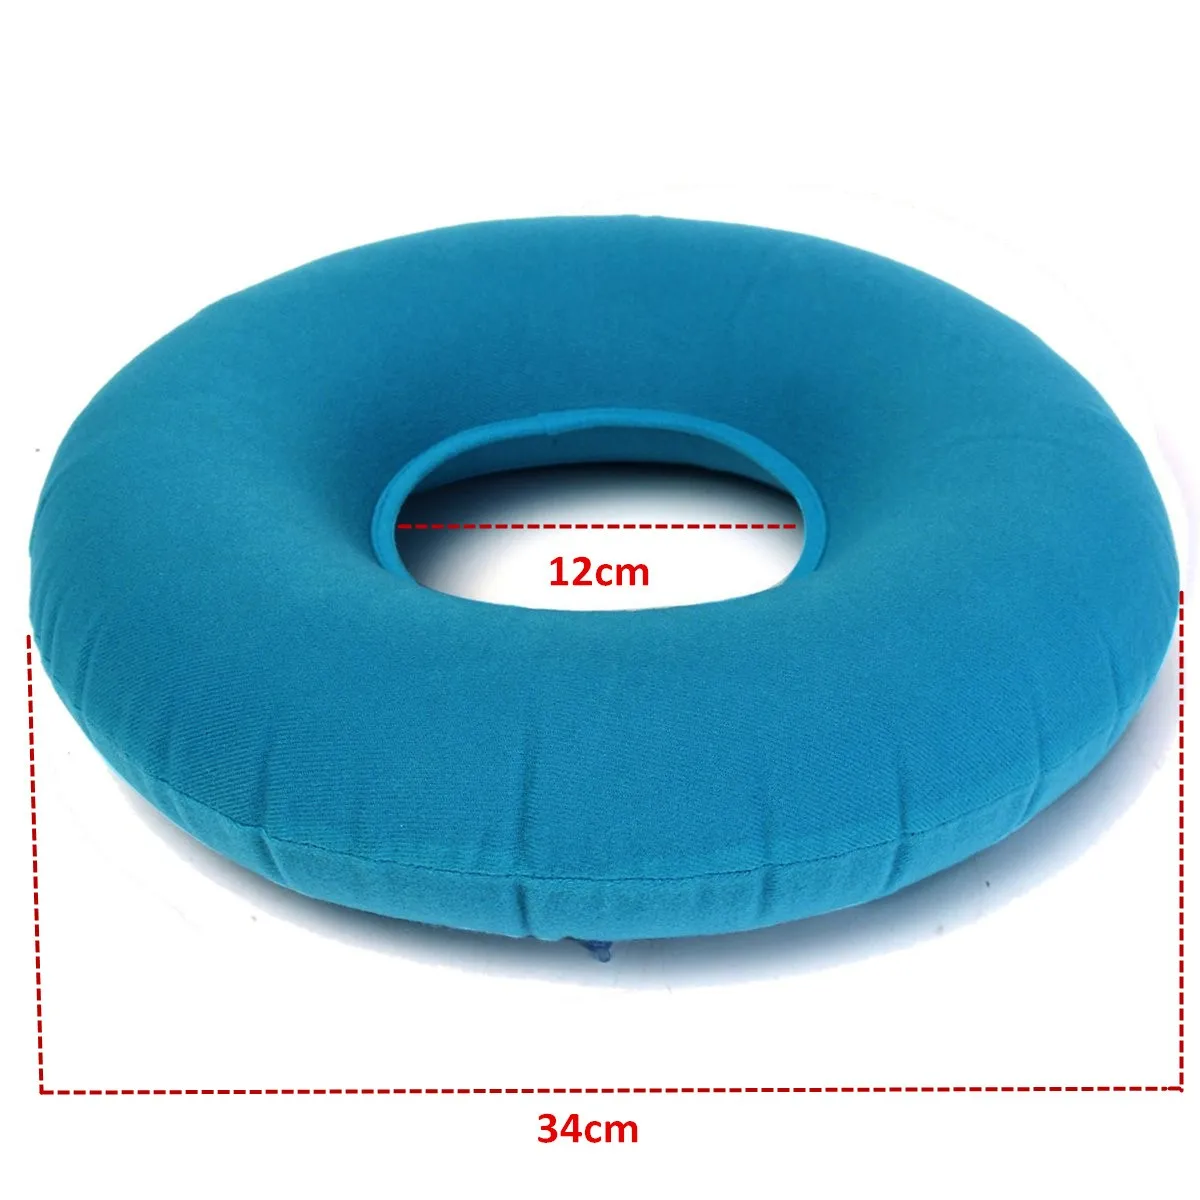 Drive Medical Rubber Inflatable Cushion 